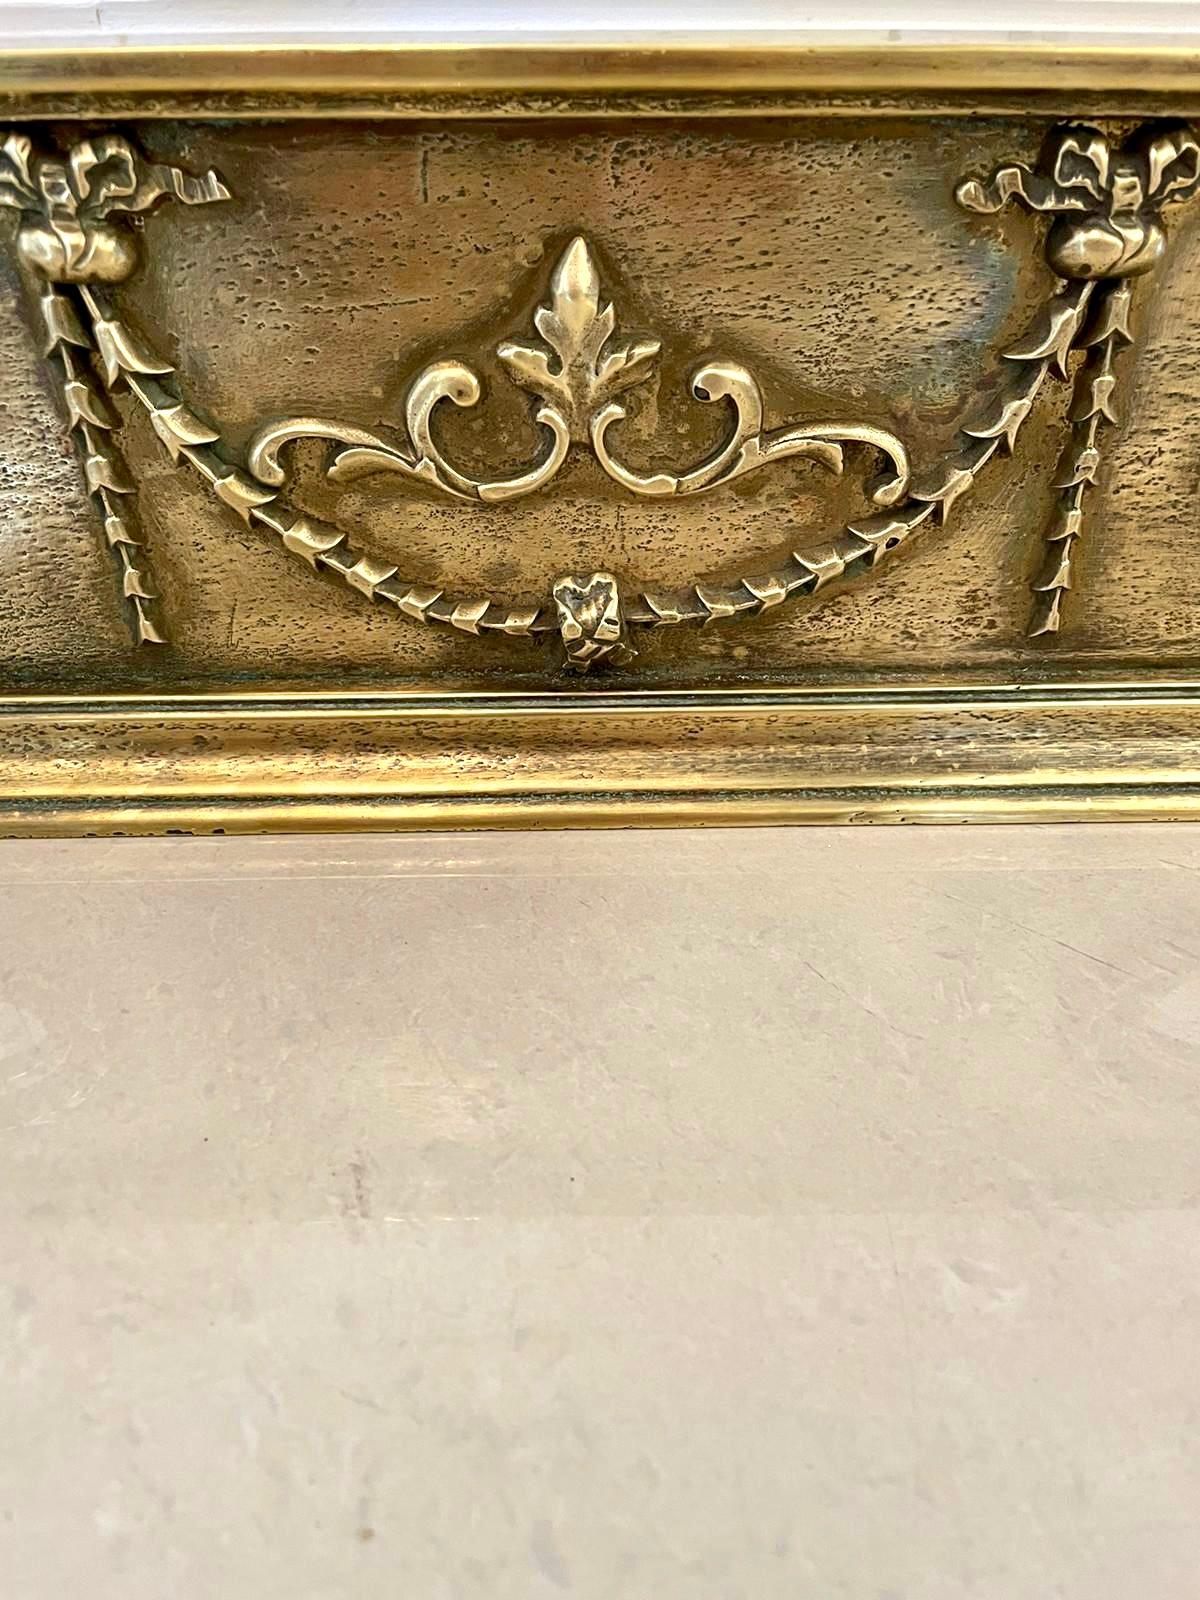 Quality antique Victorian ornate brass fender having original brass finials to the top with very ornate stunning front and sides with open ovals and casted brass decoration.

A superb example in fine original condition.

Measures: H 15.5cm then